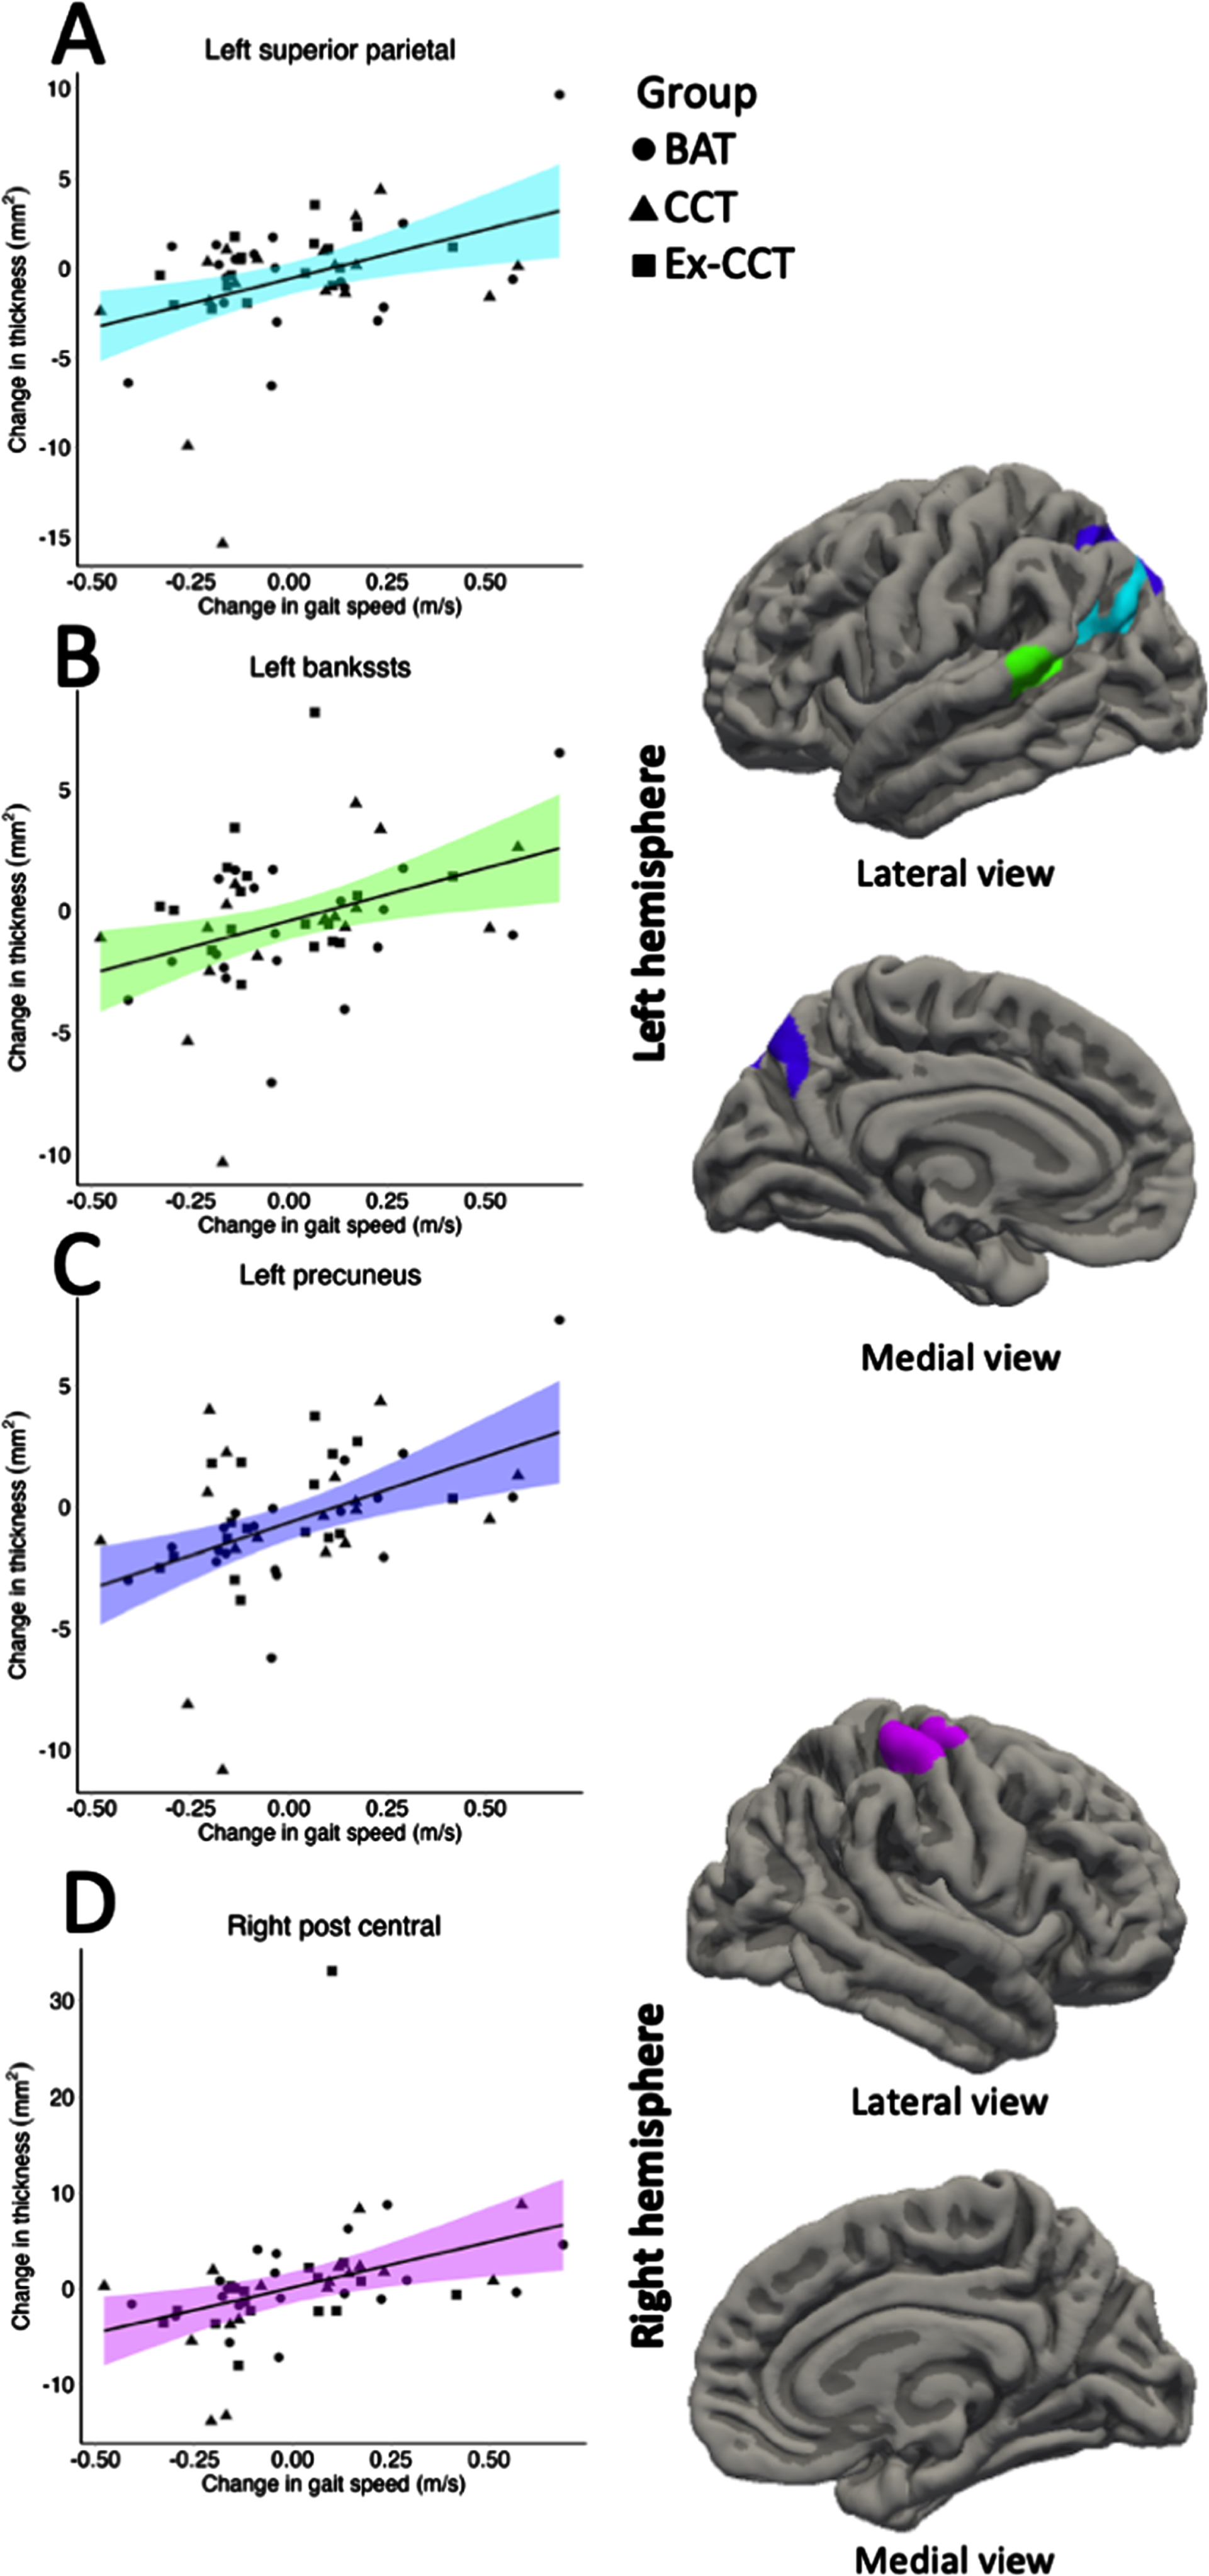 Significant correlation (α< 0.05) between: A) change in left superior parietal thickness; B) change left bankssts thickness; C) change in left precuneus thickness; and D) change in right post central thickness with change in gait speed, controlling for age, sex, and MoCA.